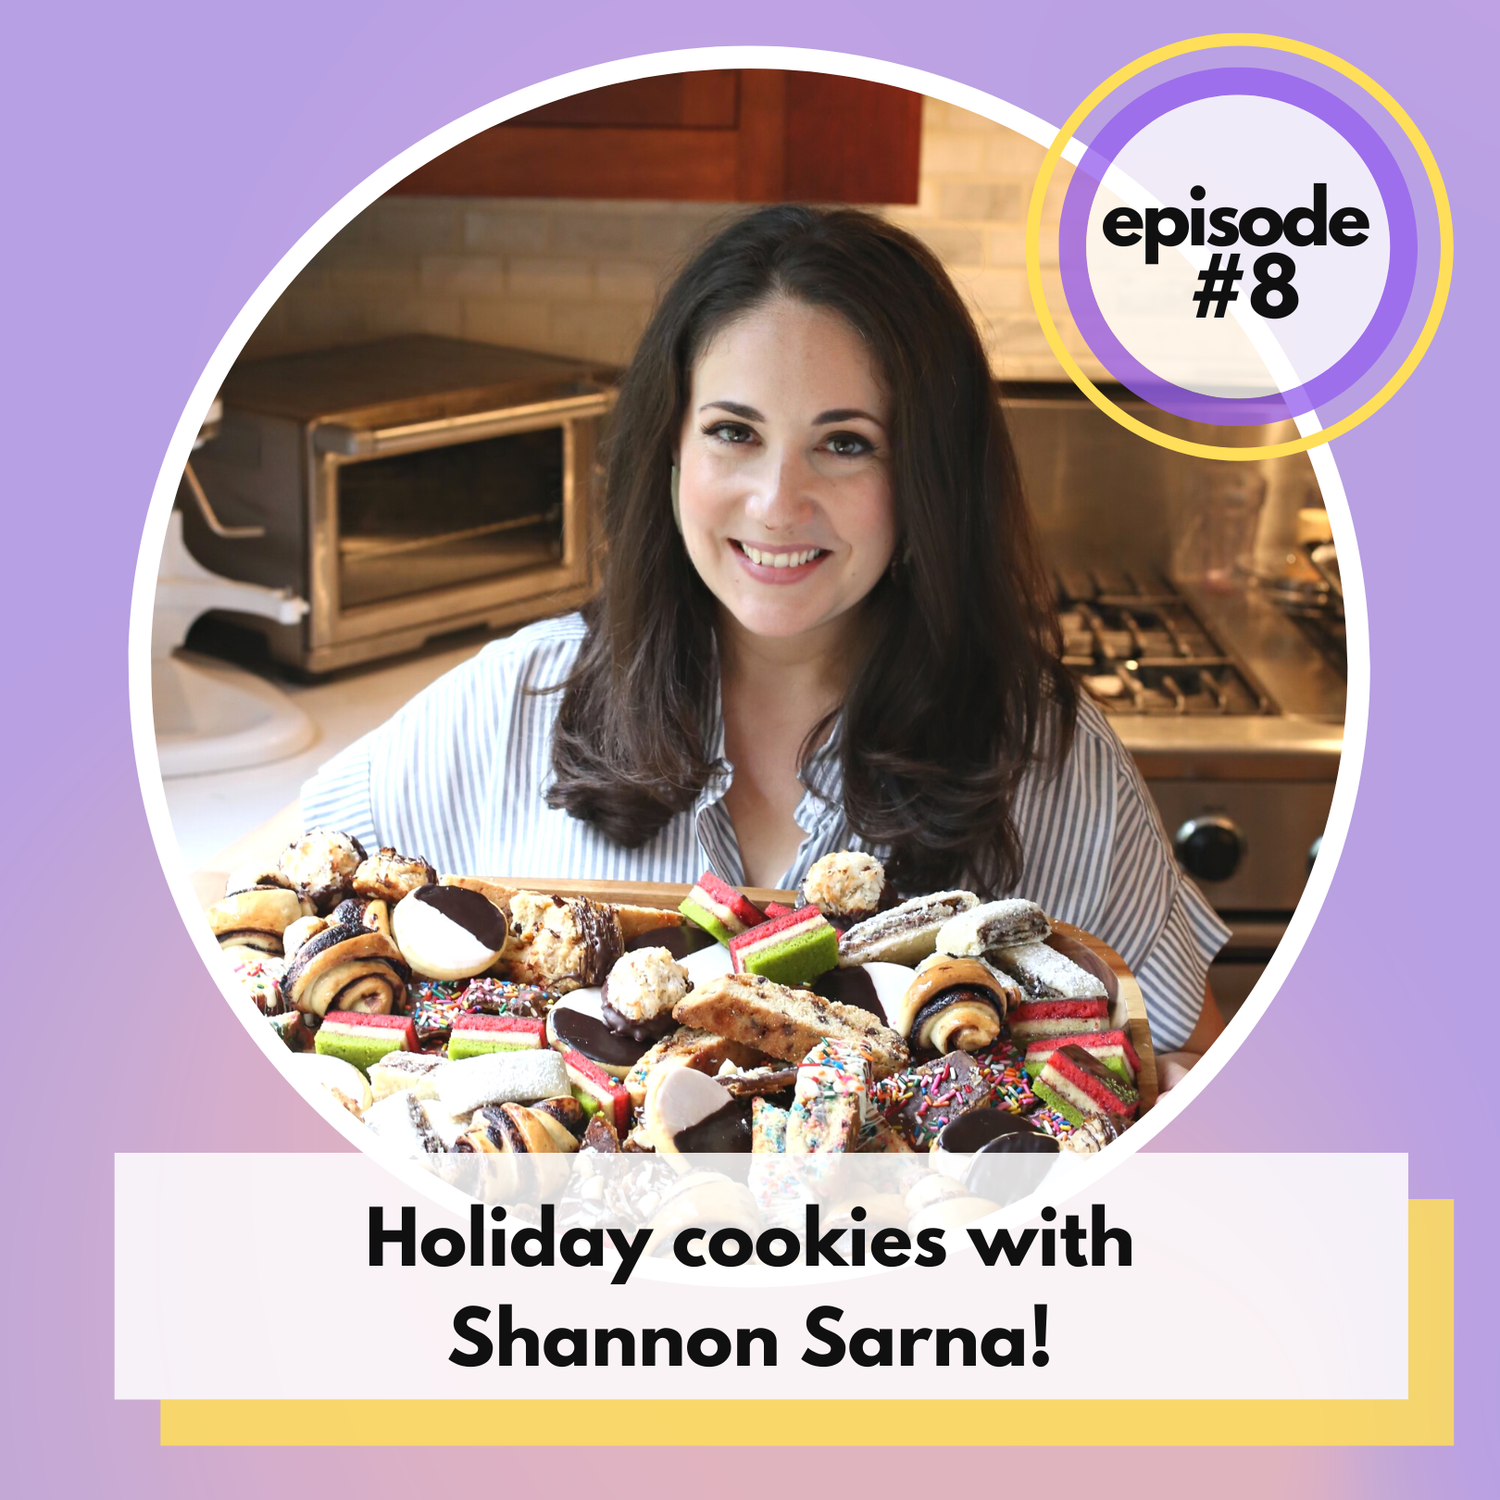 Episode 08: Holiday cookies with Shannon Sarna!